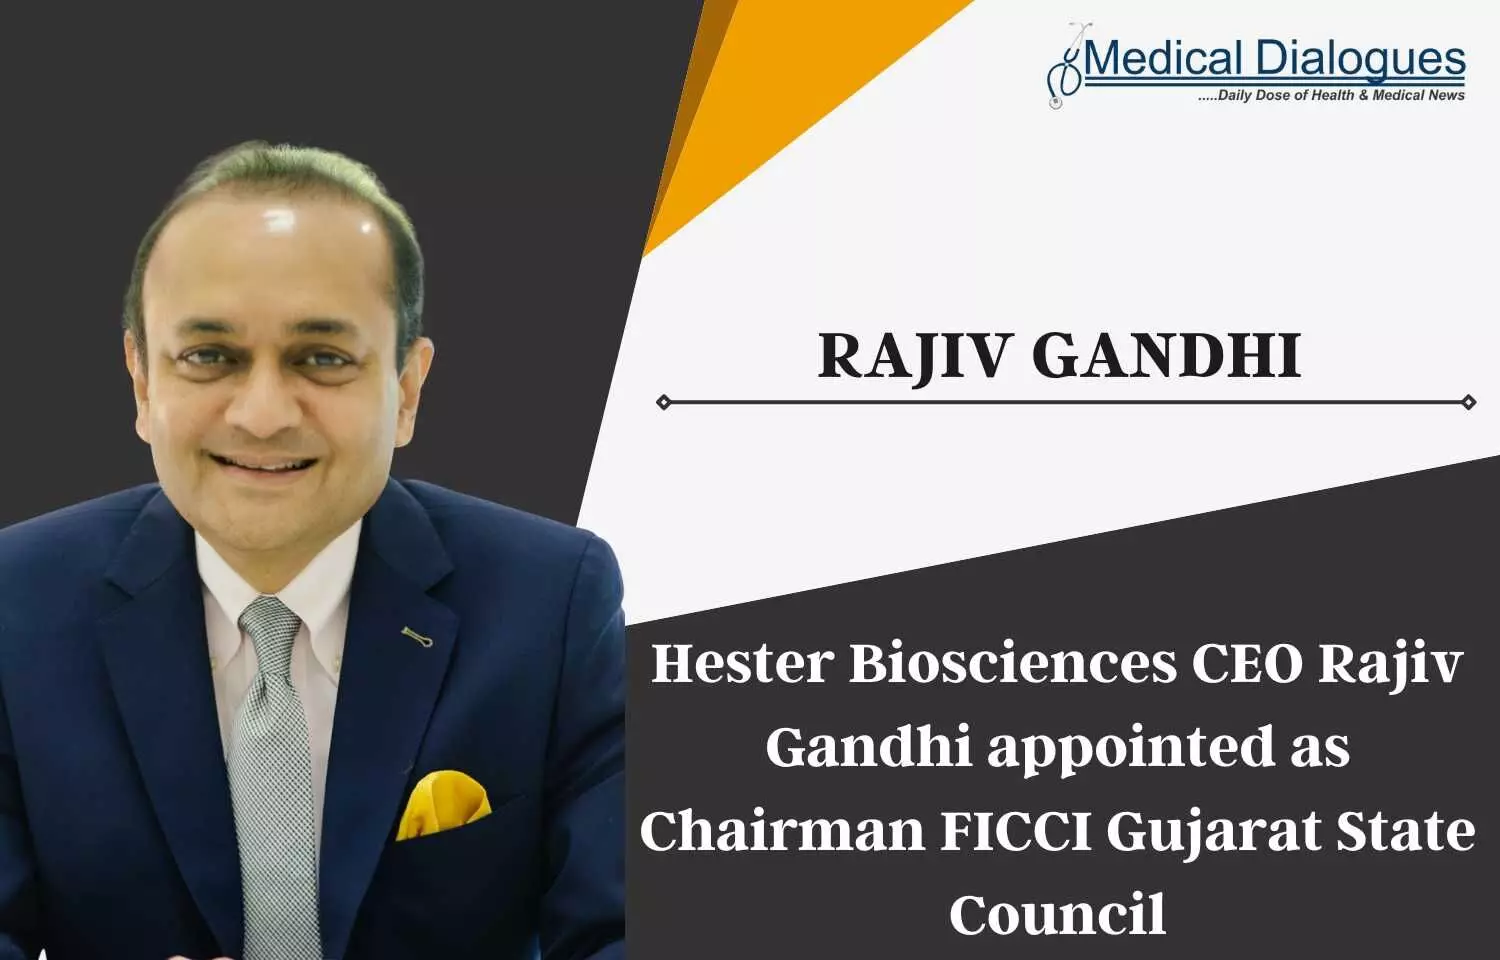 Hester Biosciences CEO Rajiv Gandhi appointed as Chairman FICCI Gujarat State Council